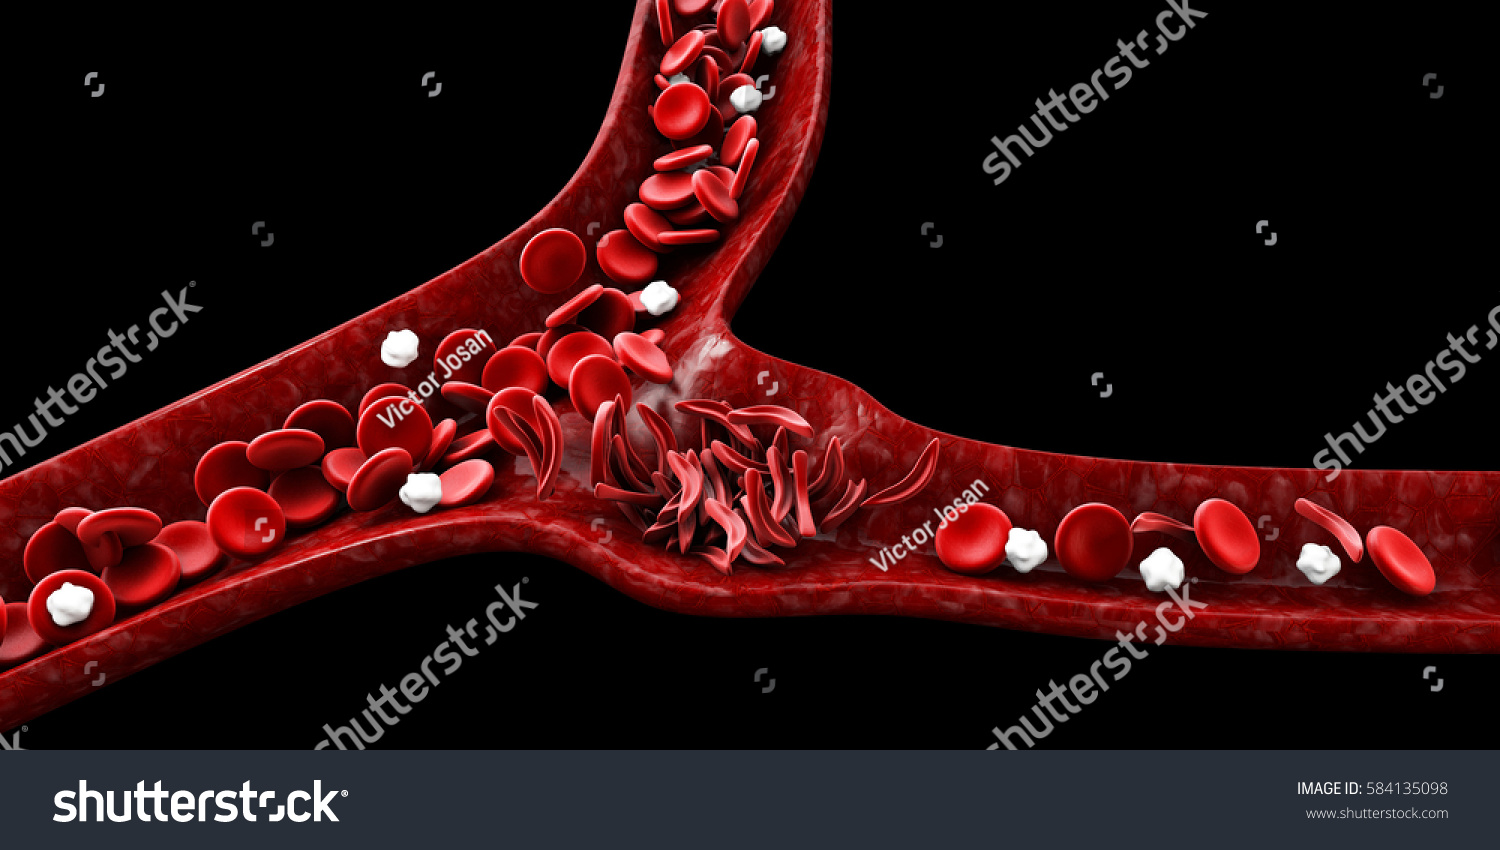 Ilustrasi Stok Sickle Cell Anemia 3d Illustration Showing 584135098 Shutterstock 6980